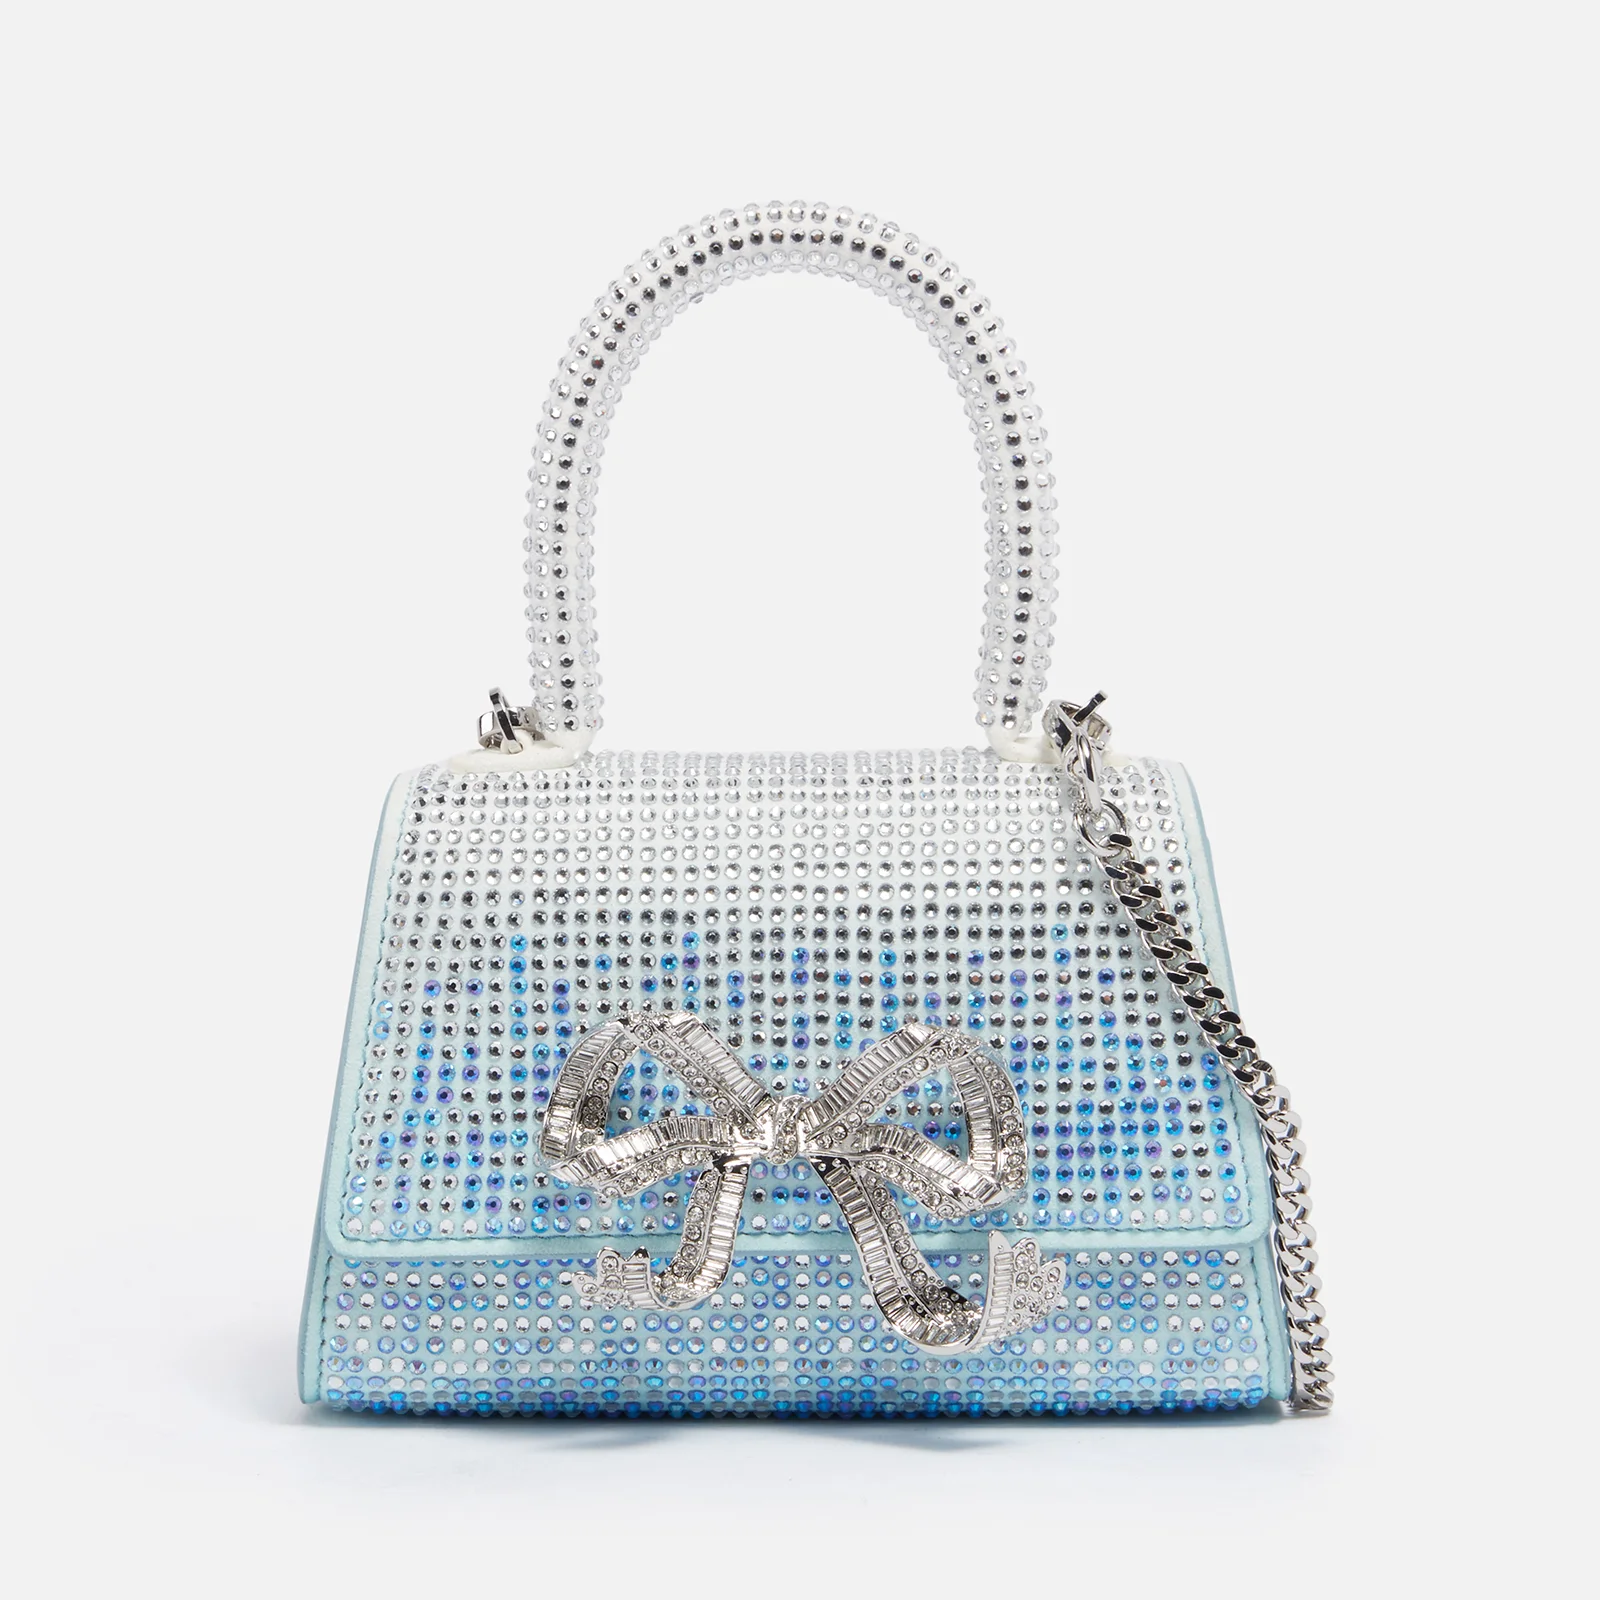 Self-Portrait Bow Embellished Ombré Leather Micro Bag Image 1